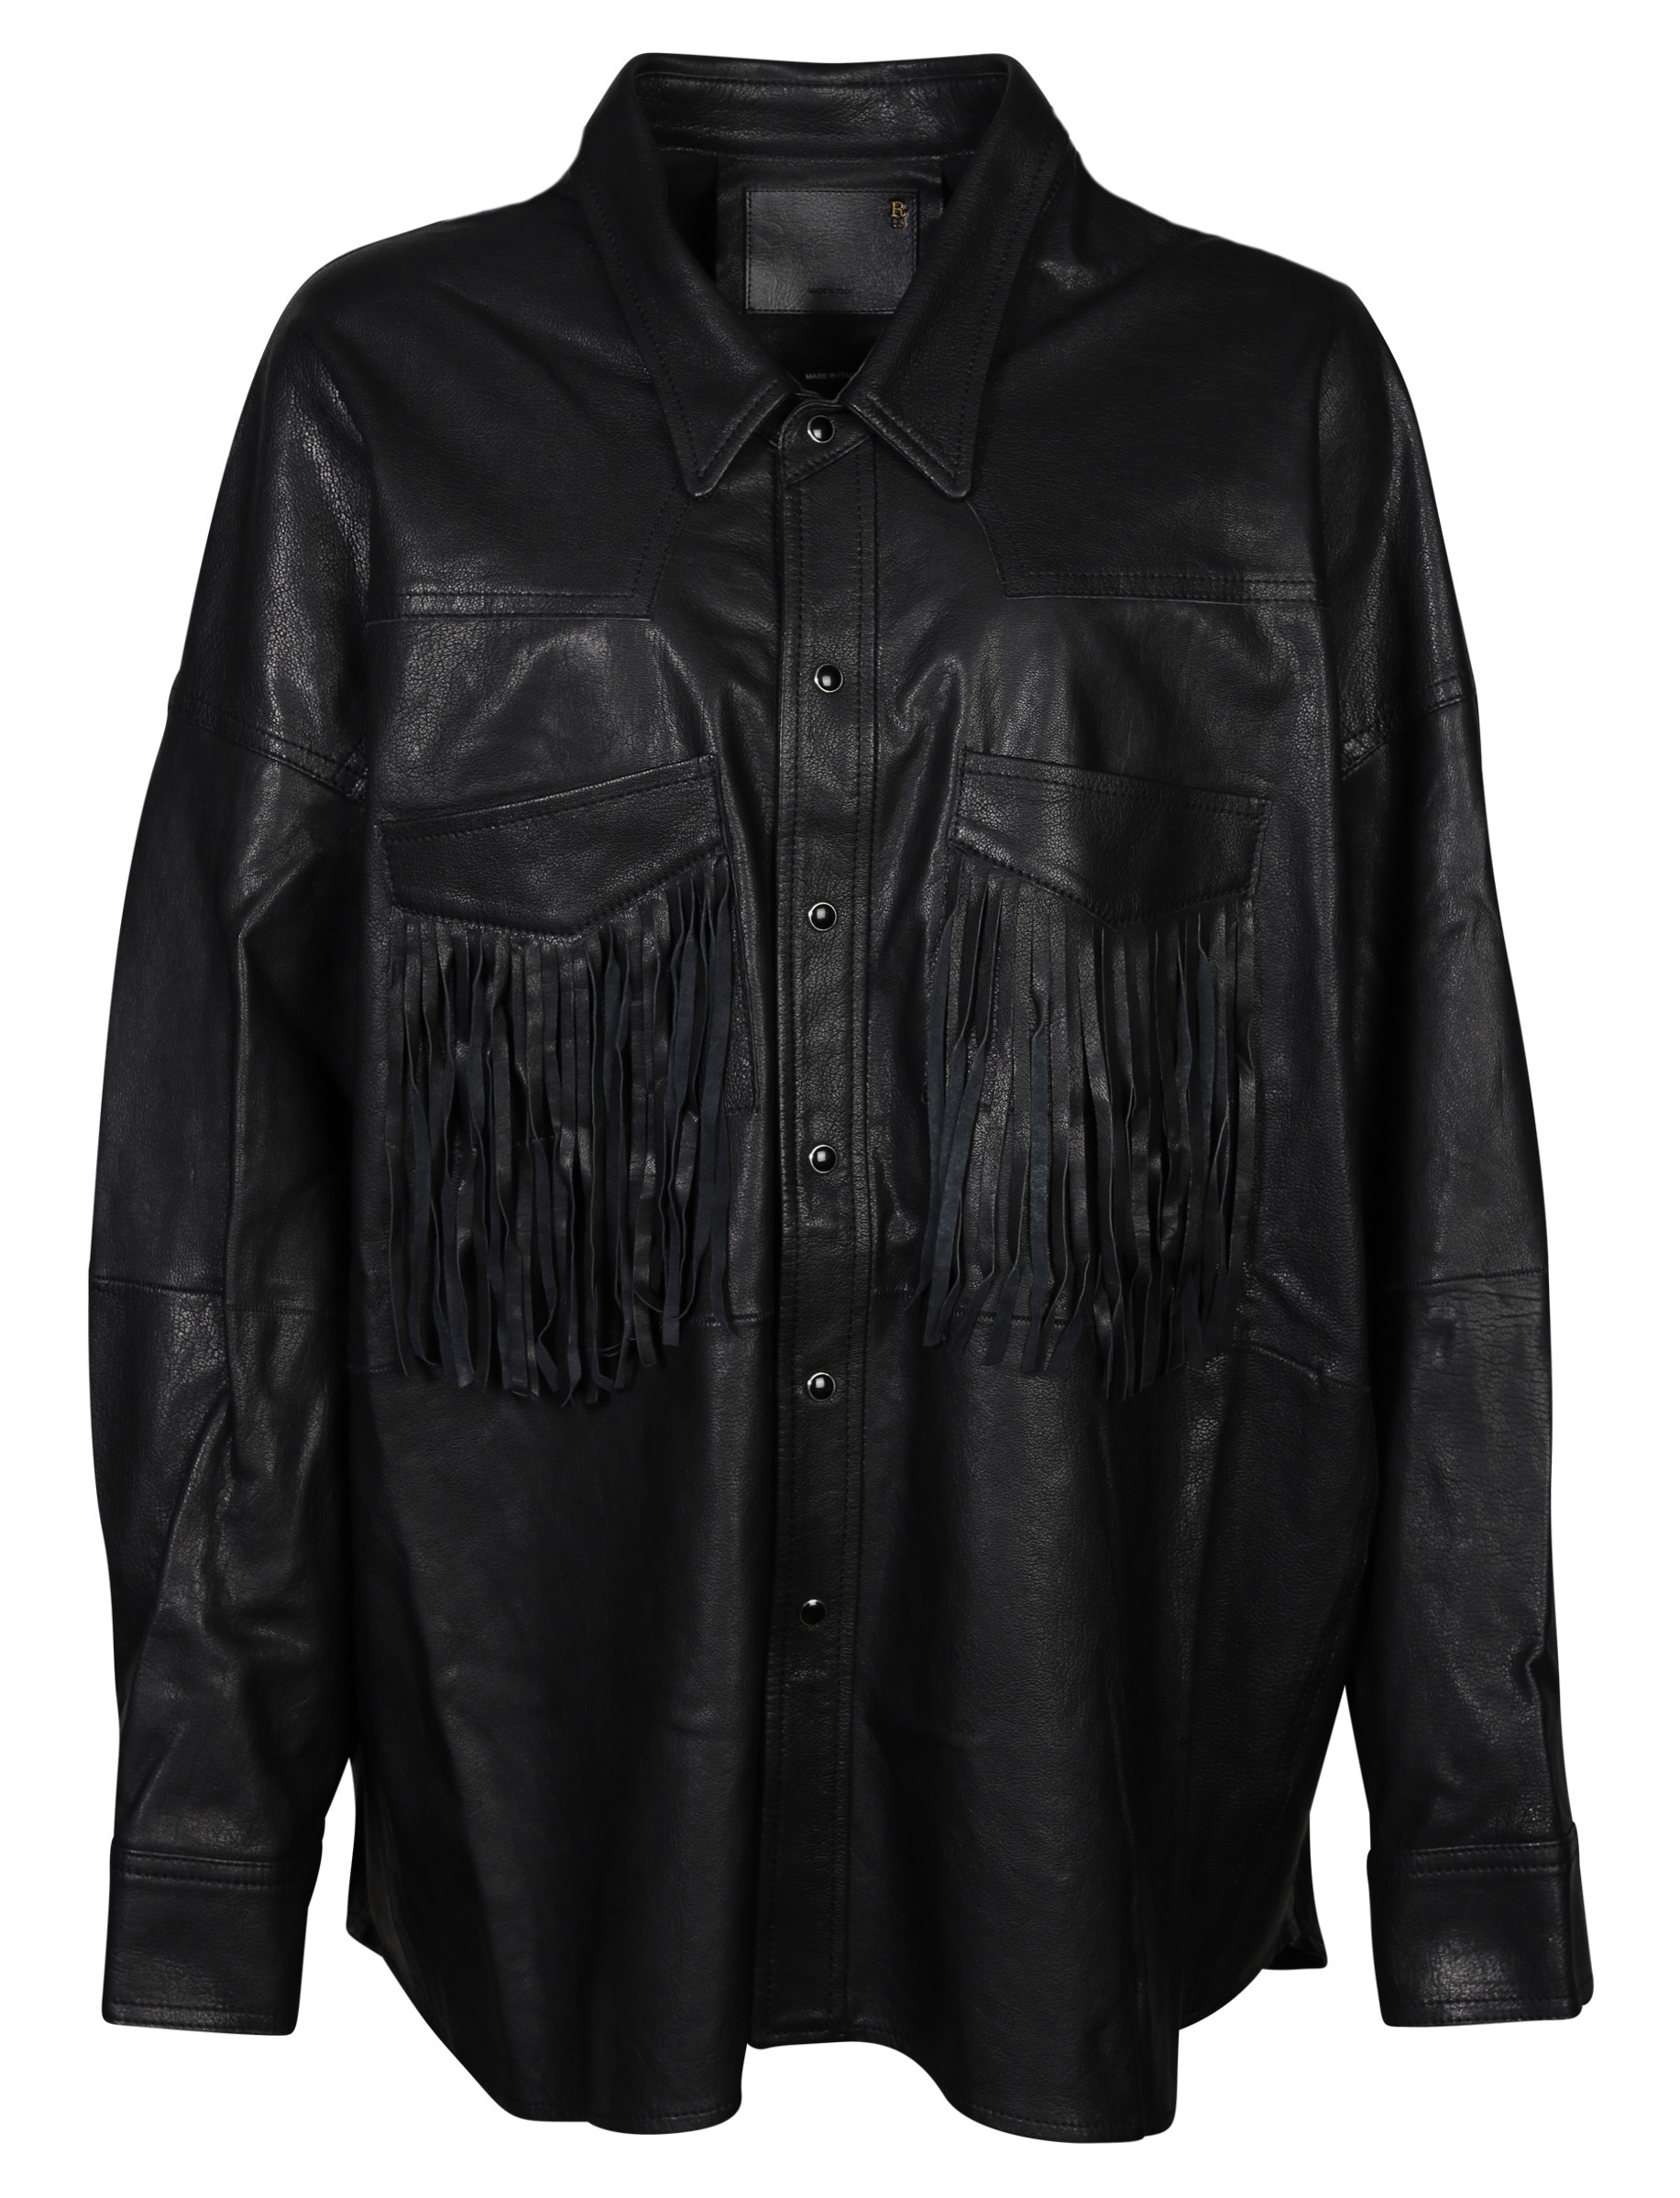 R13 Leather Overshirt Black With Fringes S